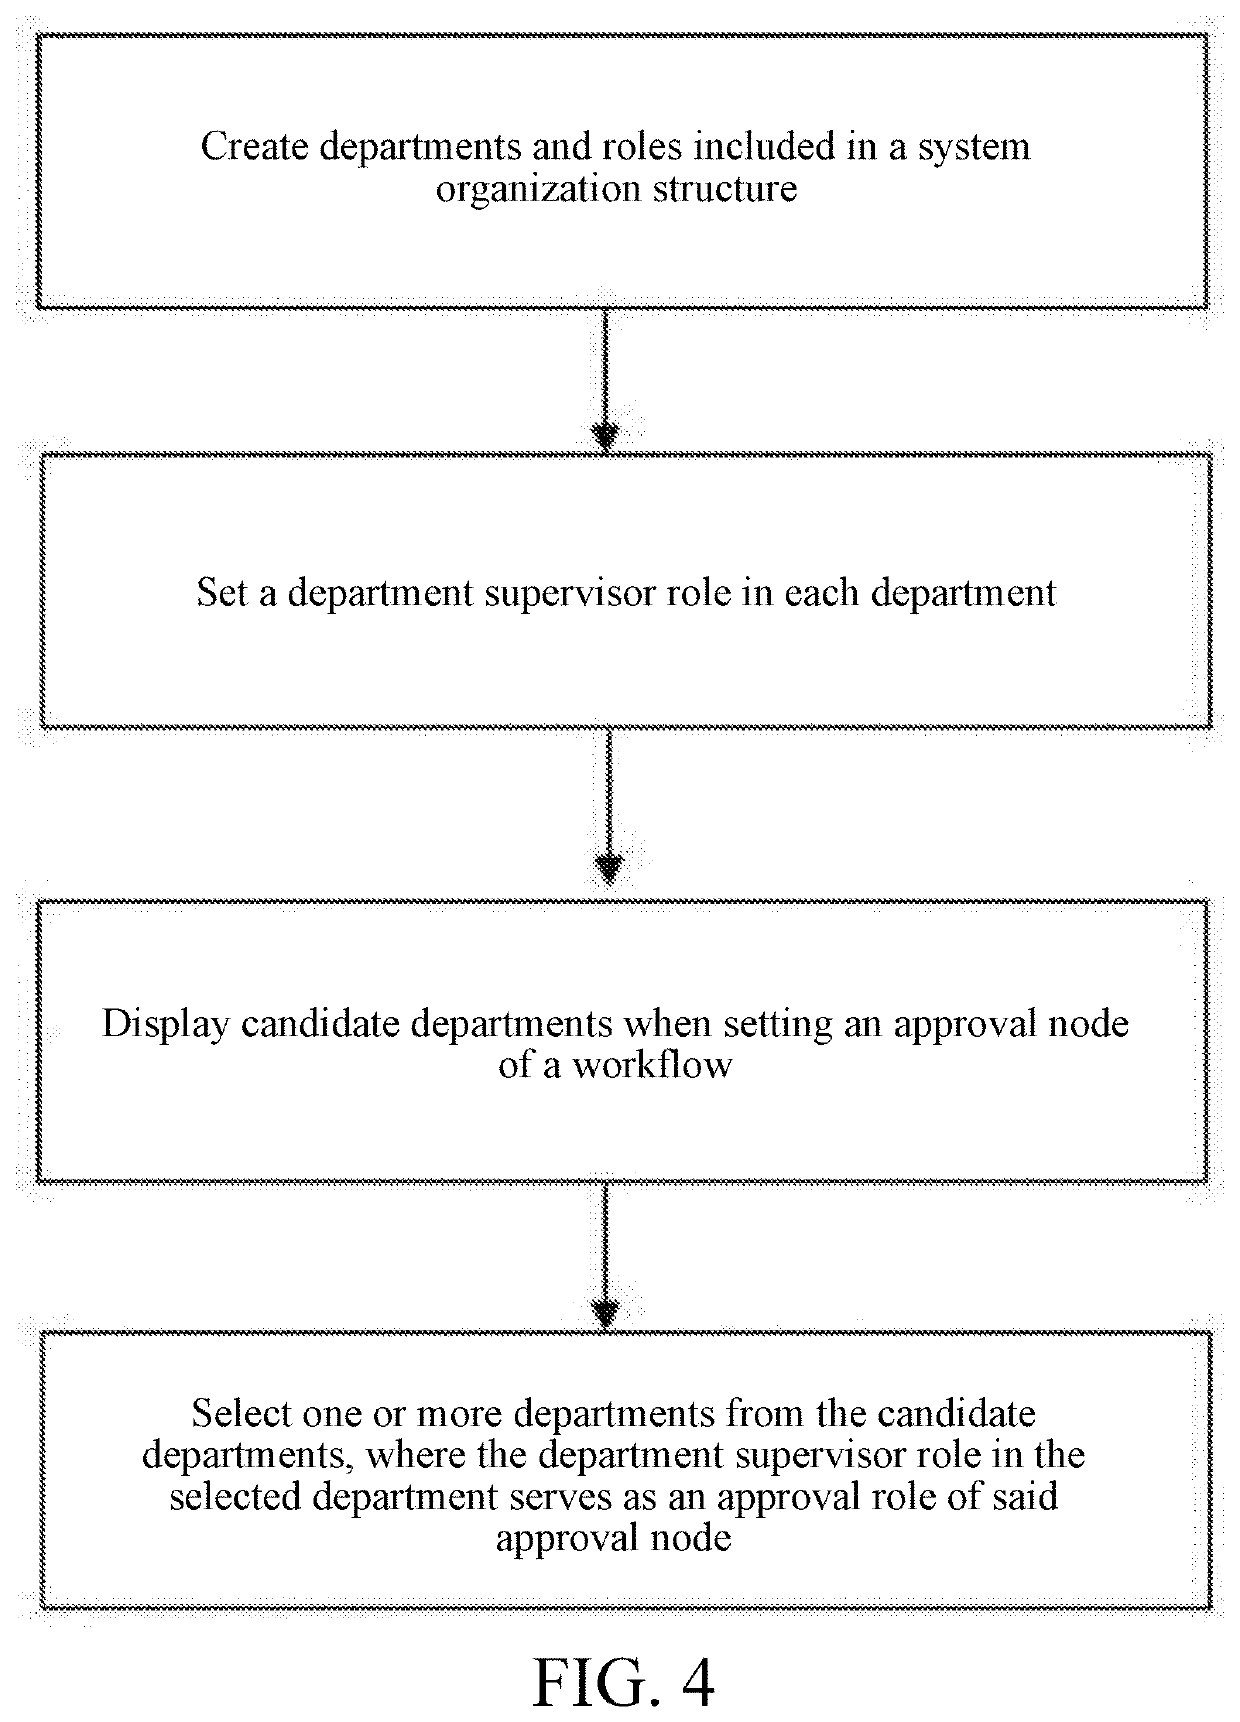 Method for setting up approval role according to department by approval node in workflow